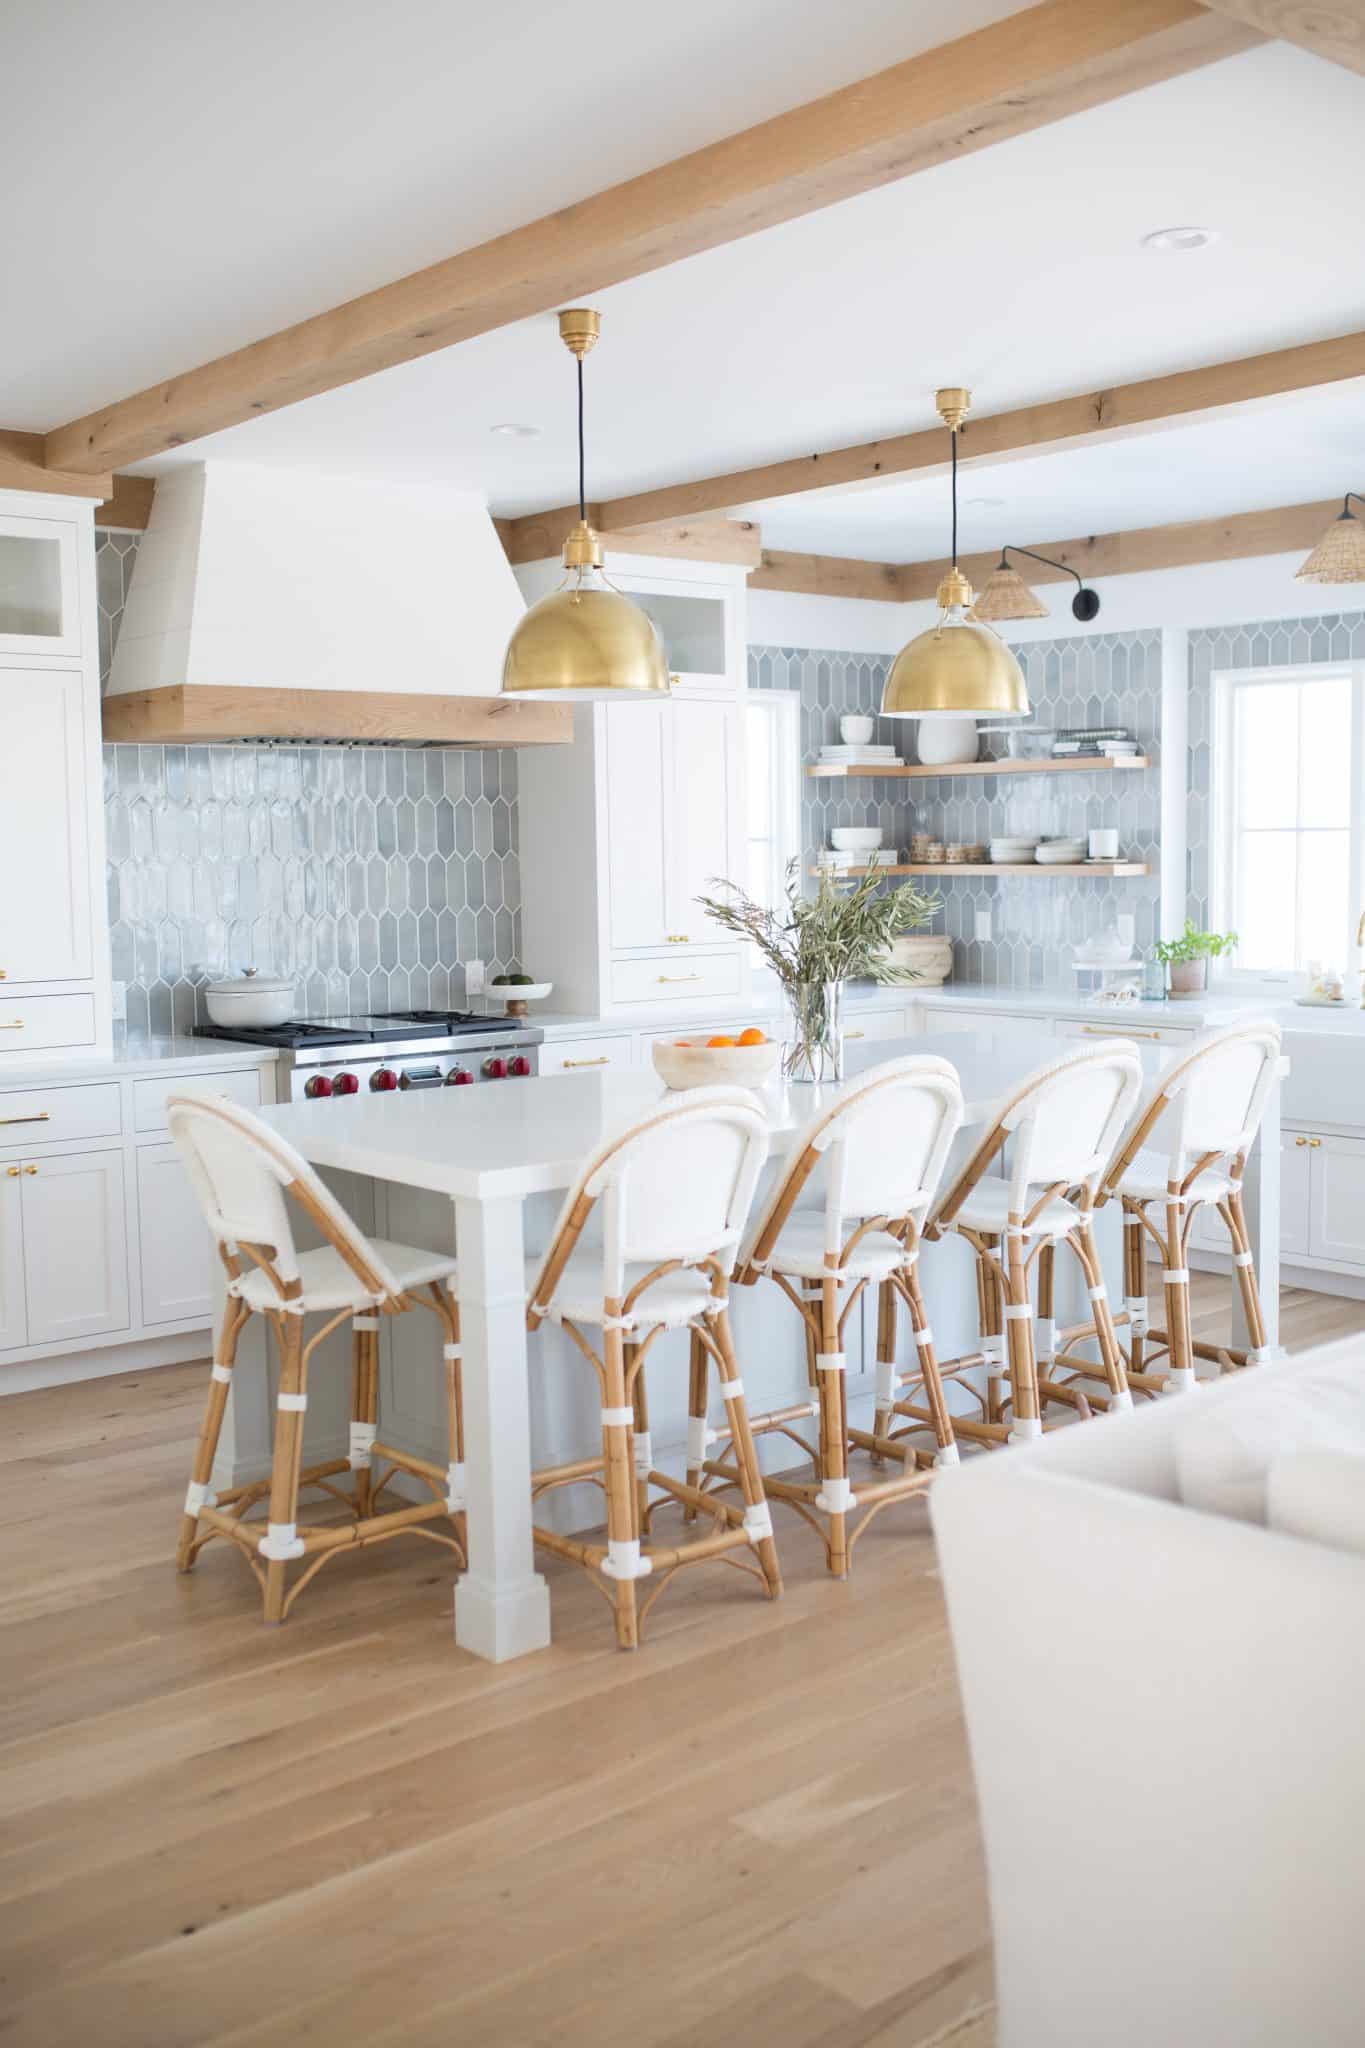 white kitchen with wood beans and matching band on edge of range hood. Serena & Lily barstools, oak flooring